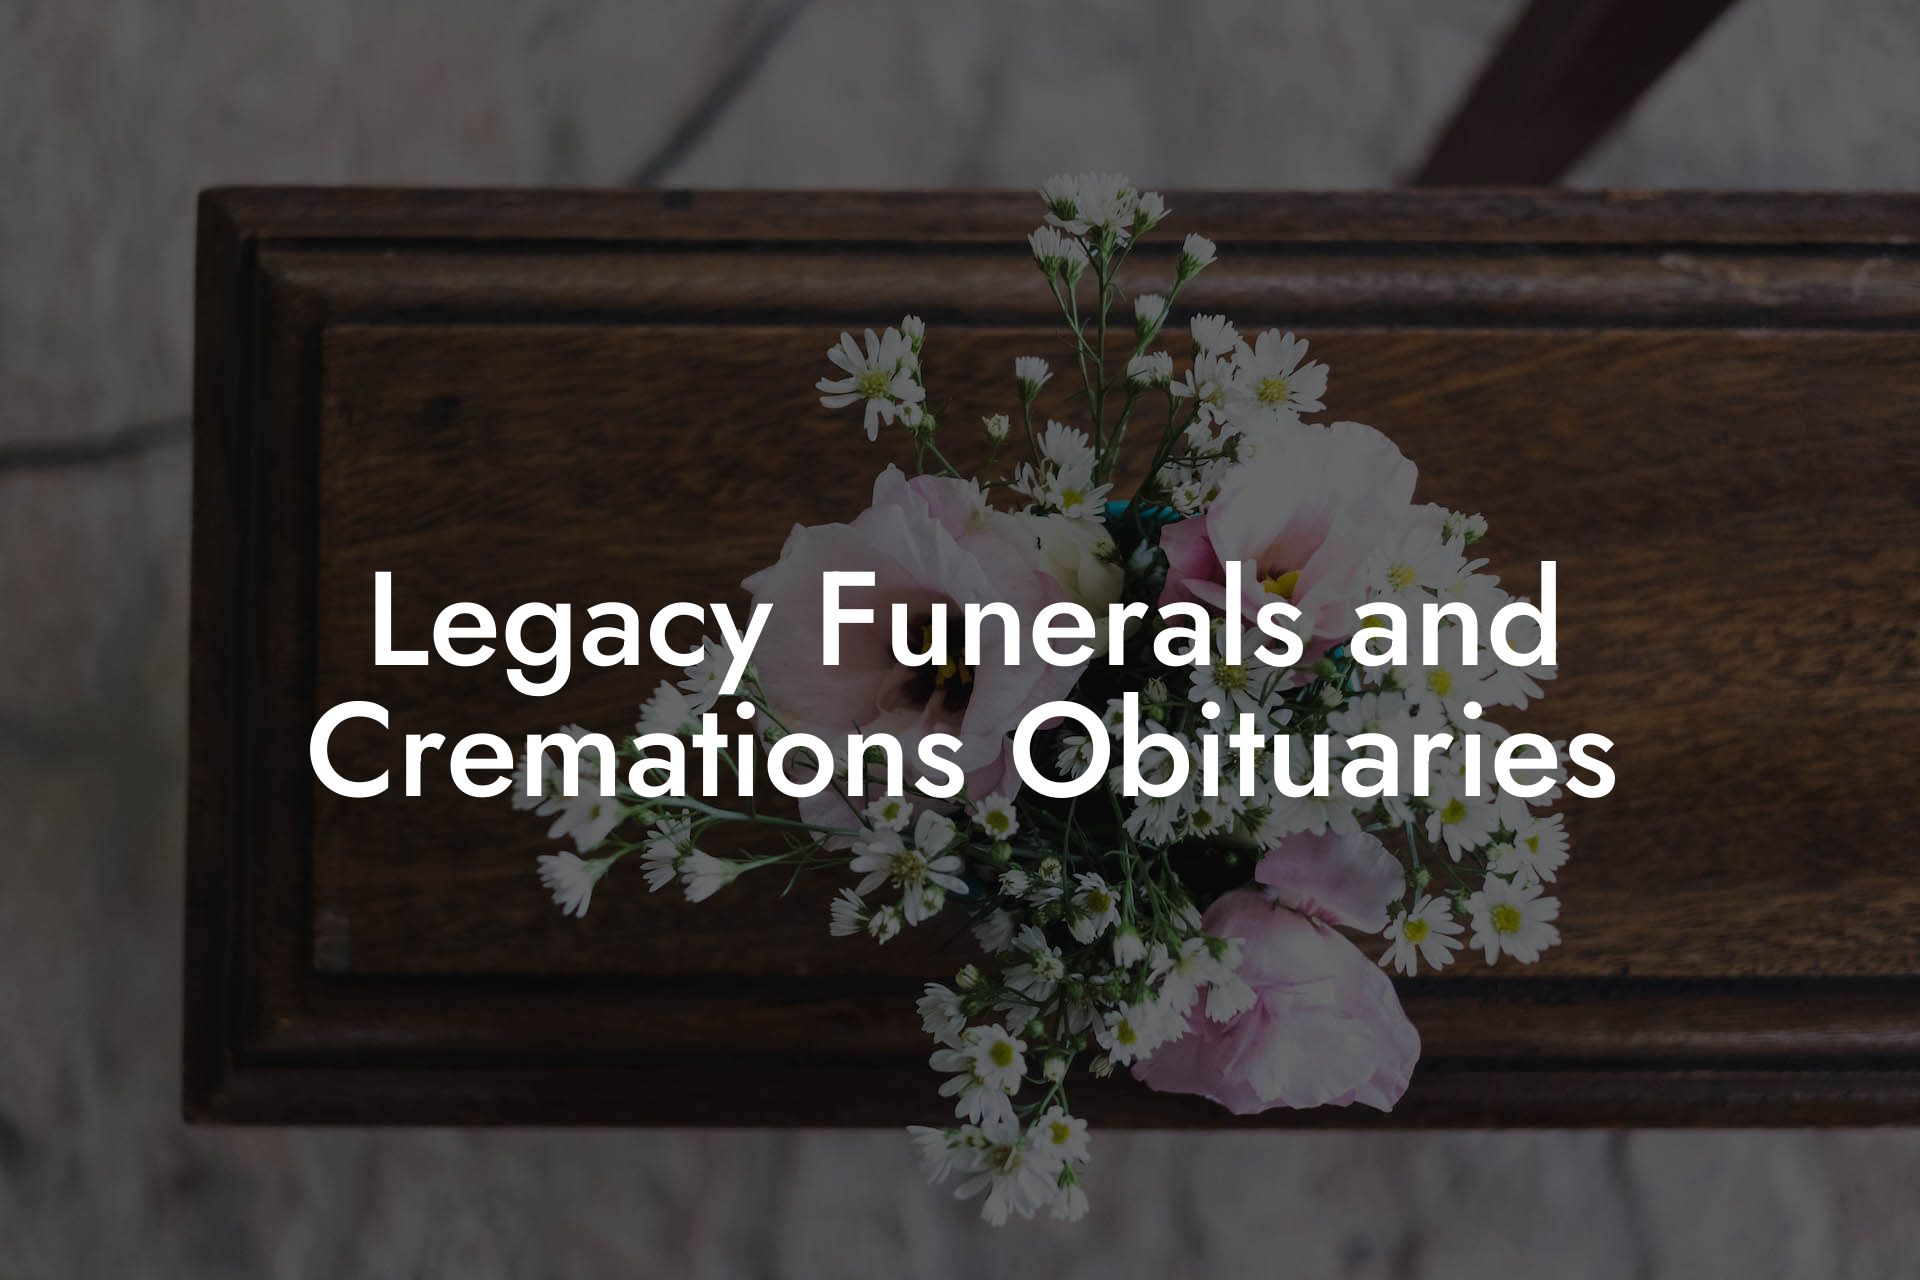 Legacy Funerals and Cremations Obituaries